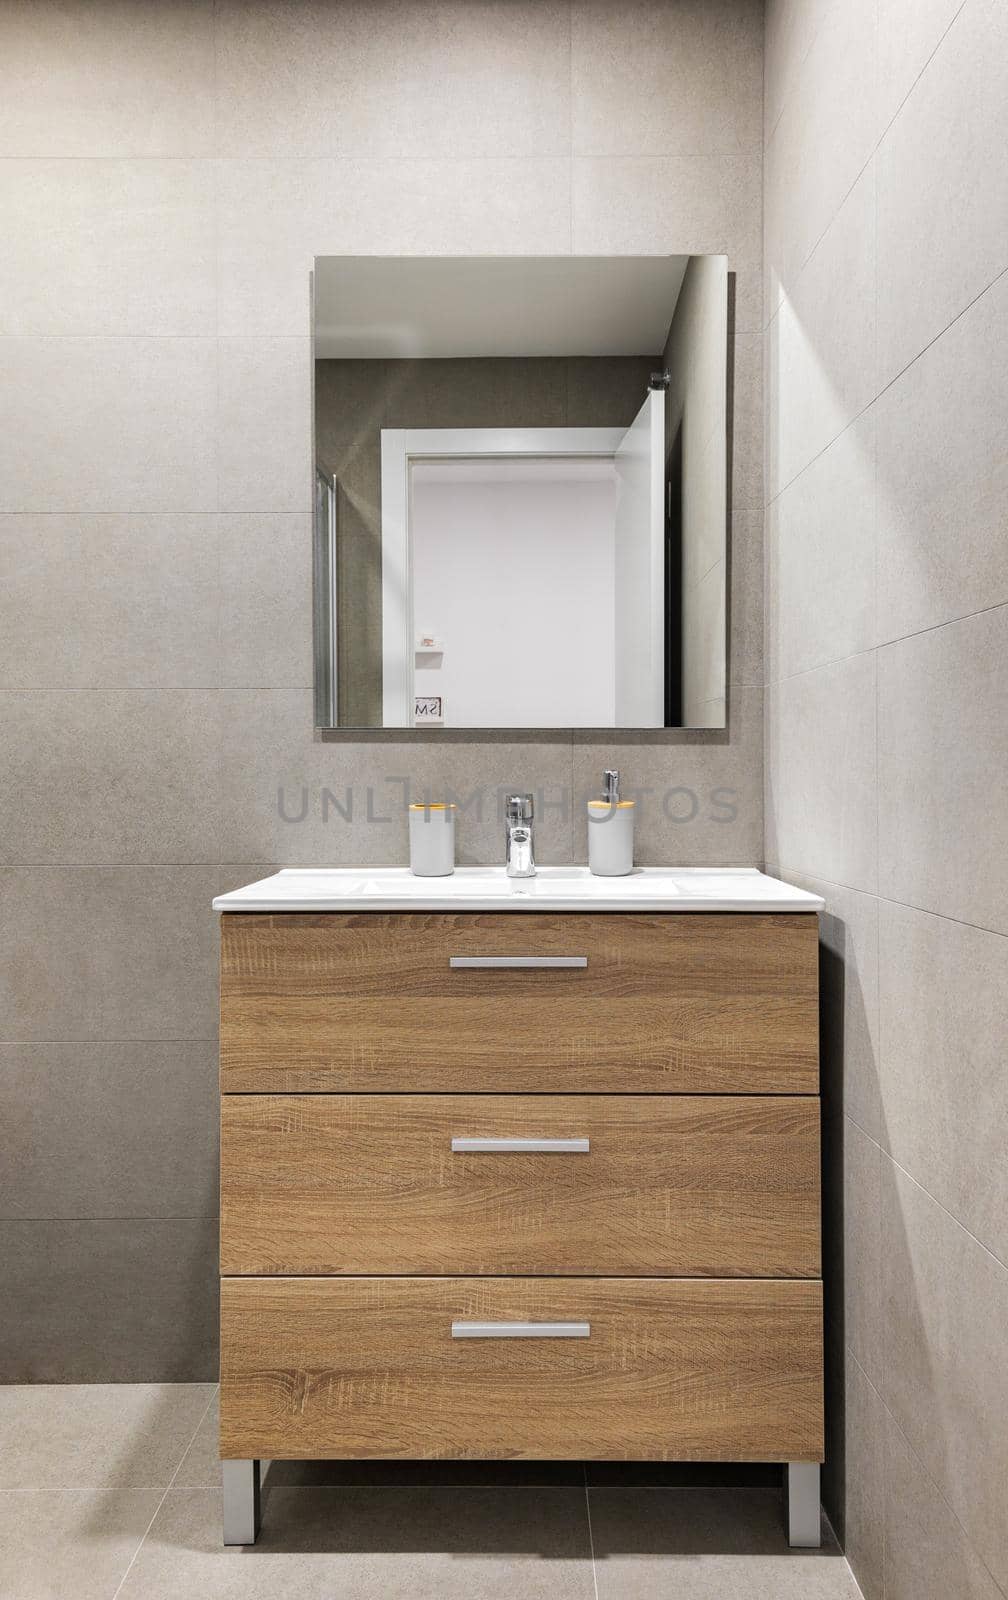 Modern refurbished bathroom in minimalist style with gray tiled walls, mirror and wooden drawers under sink